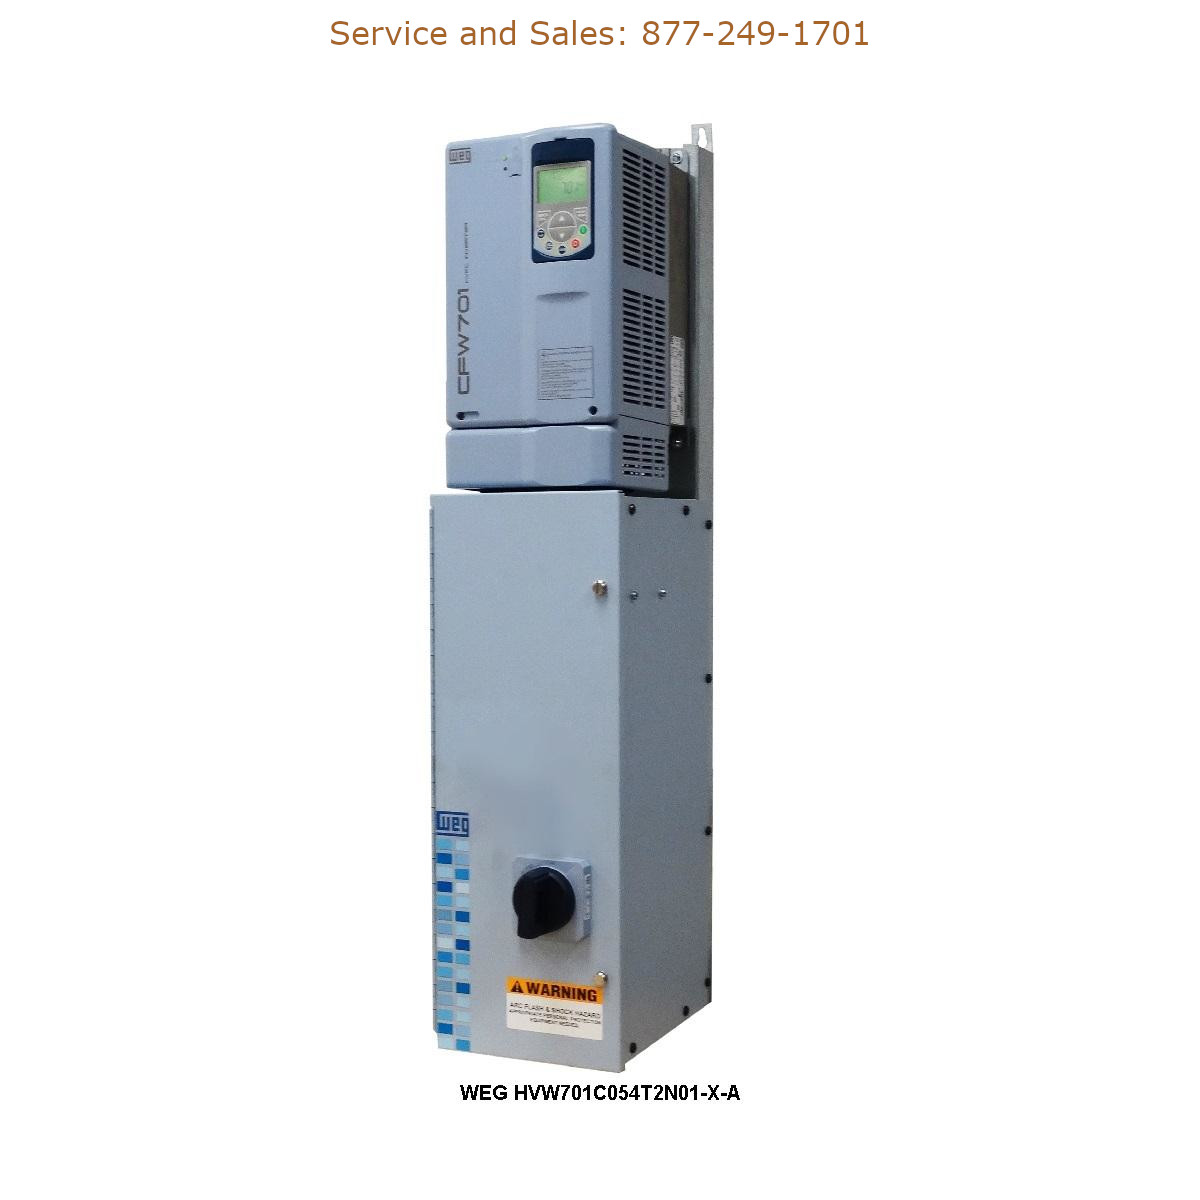 WEG HVW701C054T2N01-X-A WEG Model Number HVW701C054T2N01-X-A WEG Drives, Variable Speed Drives Repair Service, Troubleshooting, Replacement Parts https://gesrepair.com/wp-content/uploads/2022/WEG/WEG_HVW701C054T2N01-X-A_Drives_Variable_Speed_Drives.jpg